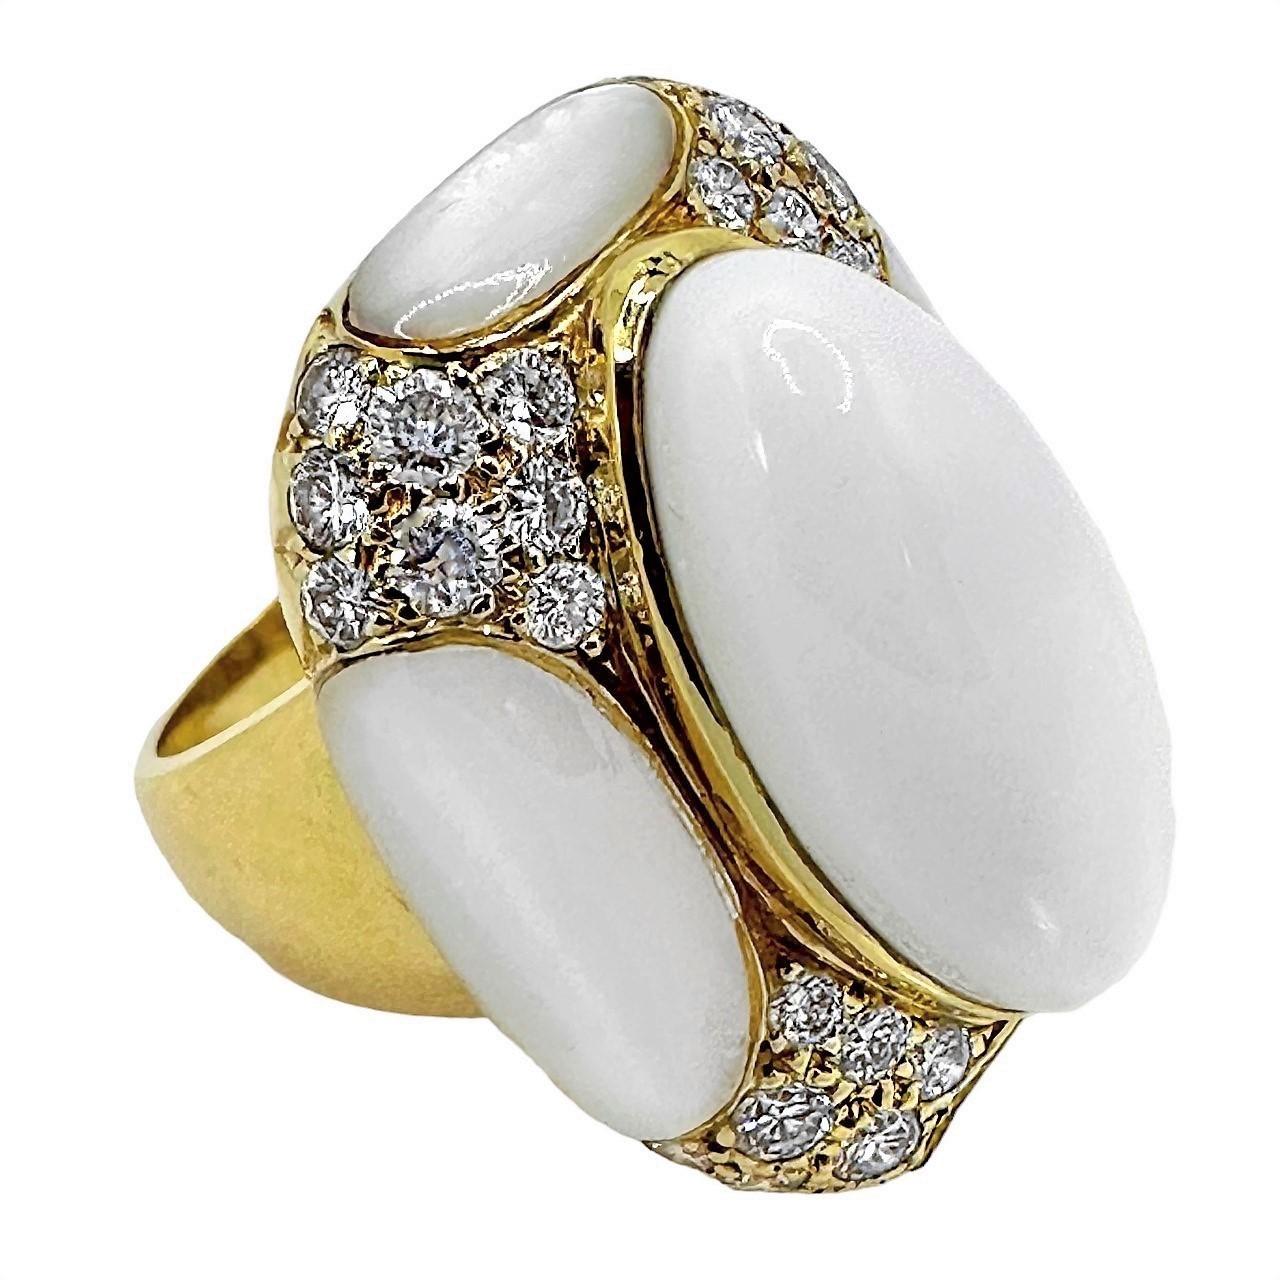 This beautiful and unusual vintage Albert Lipten fashion ring, crafted in 18K yellow gold, is visually seductive. The combination of the white onyx cabochon in the center next to mother of pearl sections and diamond pave corners, creates a unique